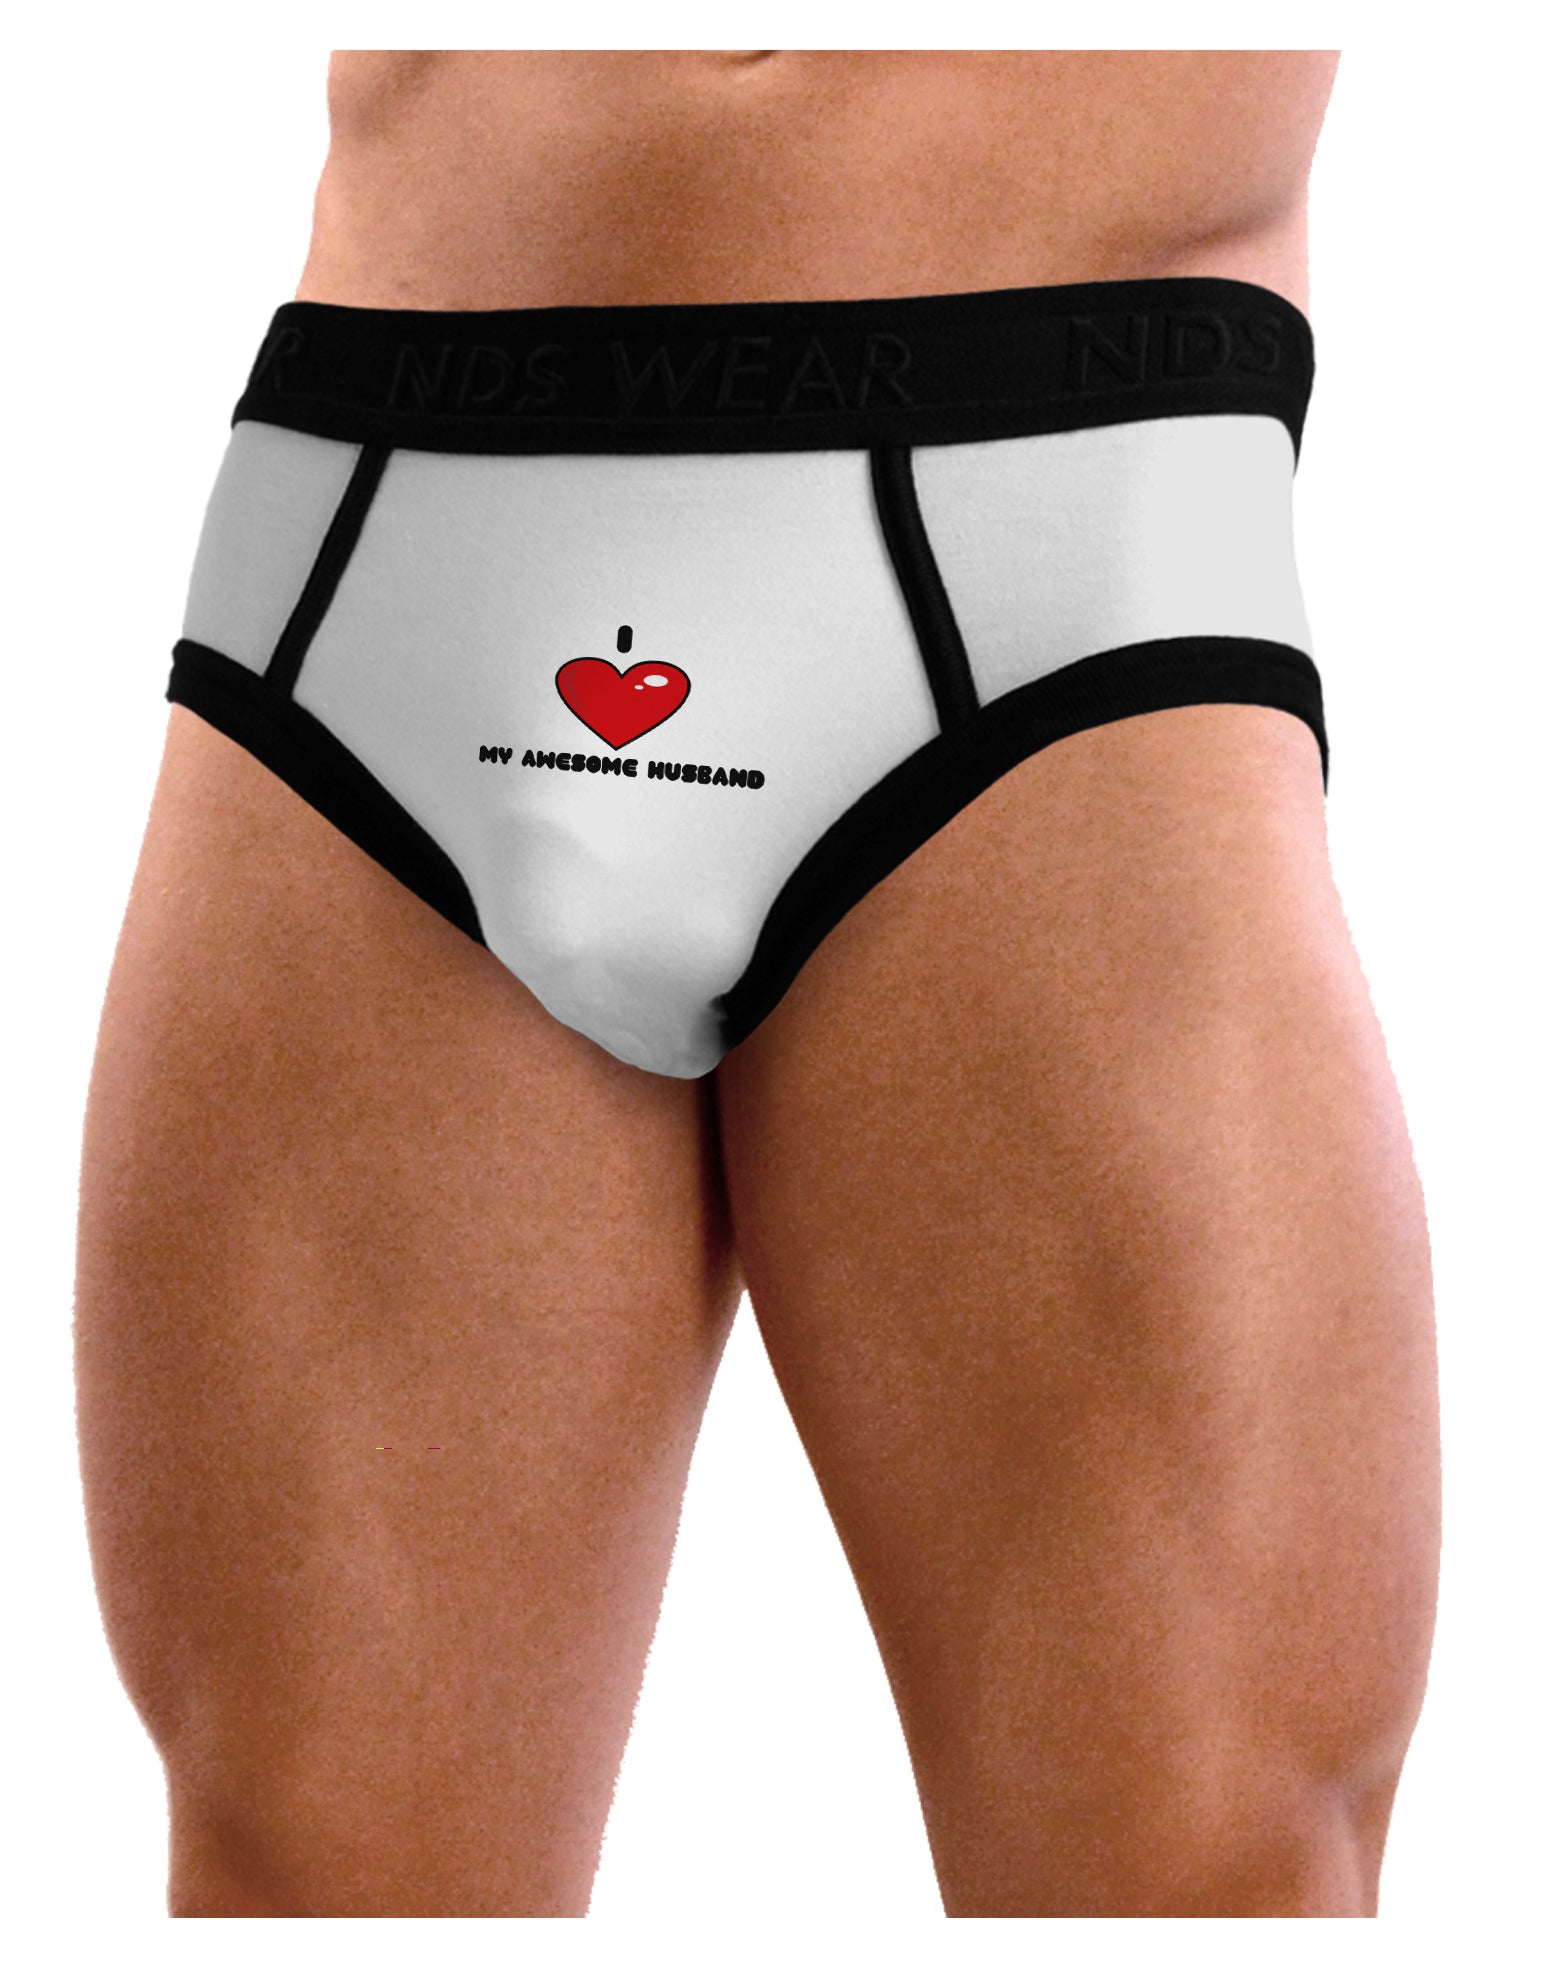 I Heart My Awesome Husband Mens NDS Wear Briefs Underwear by TooLoud